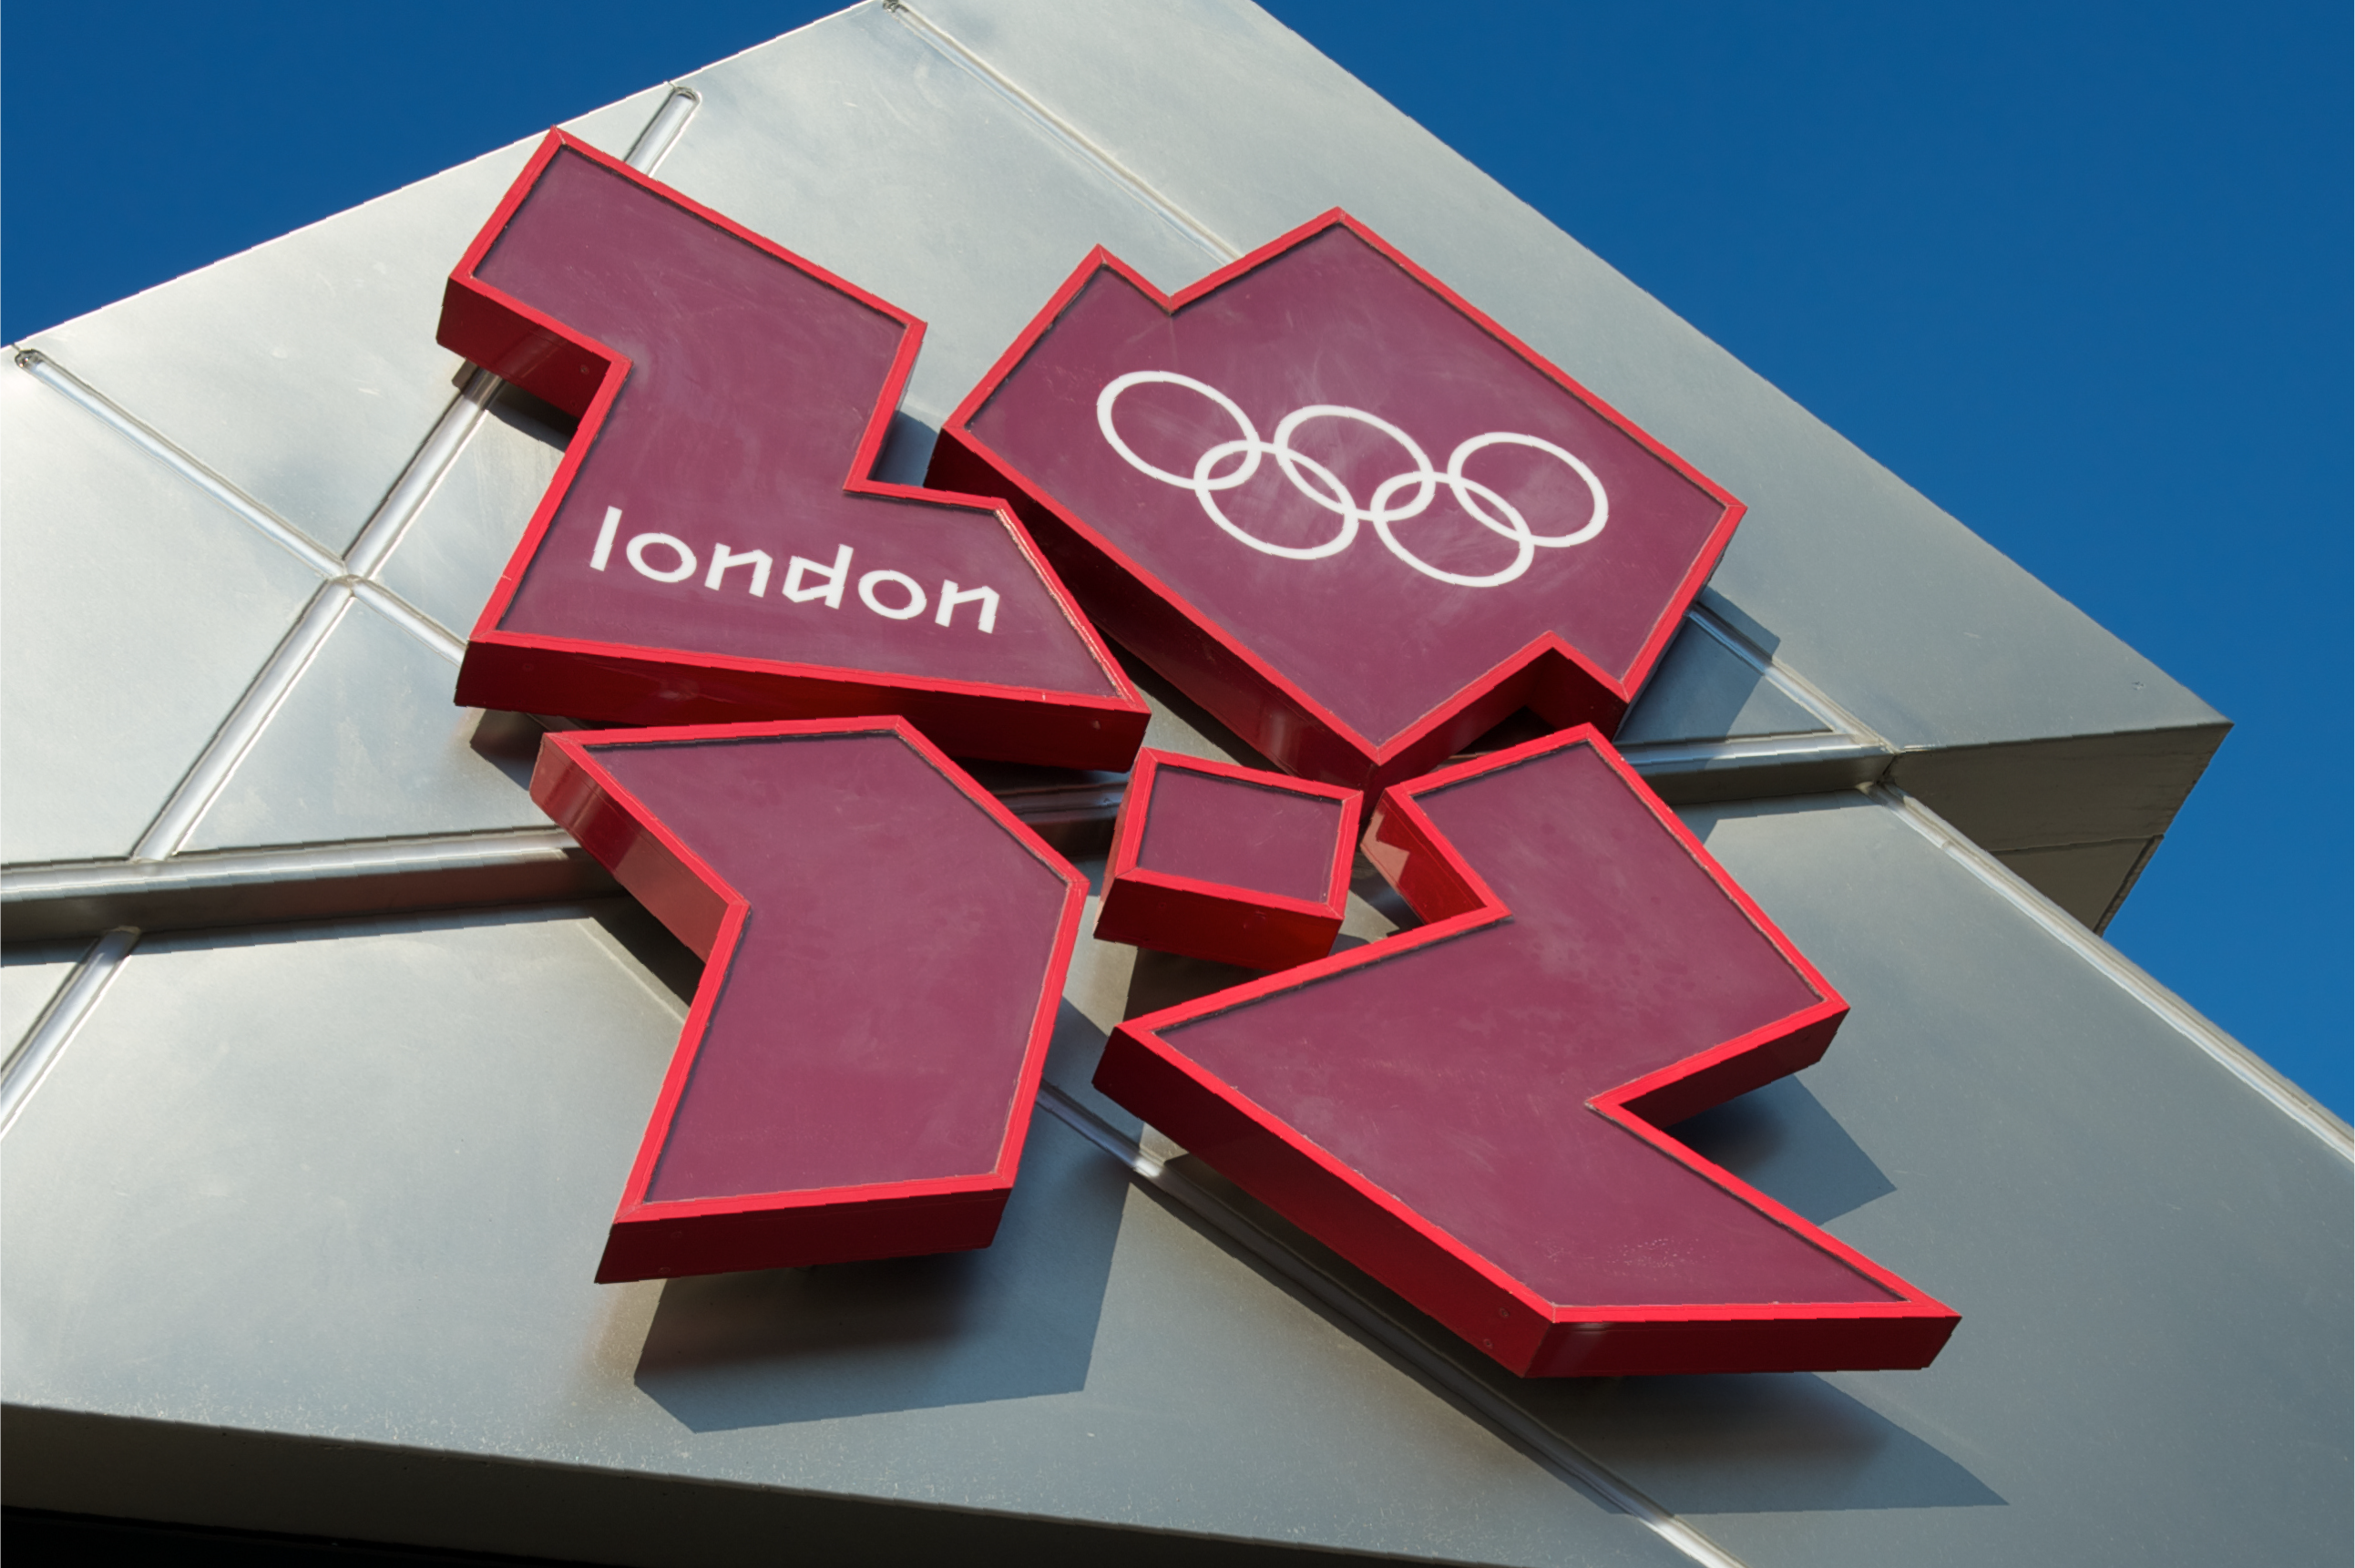 A three-dimensional London 2012 Olympics logo on the side of a building.